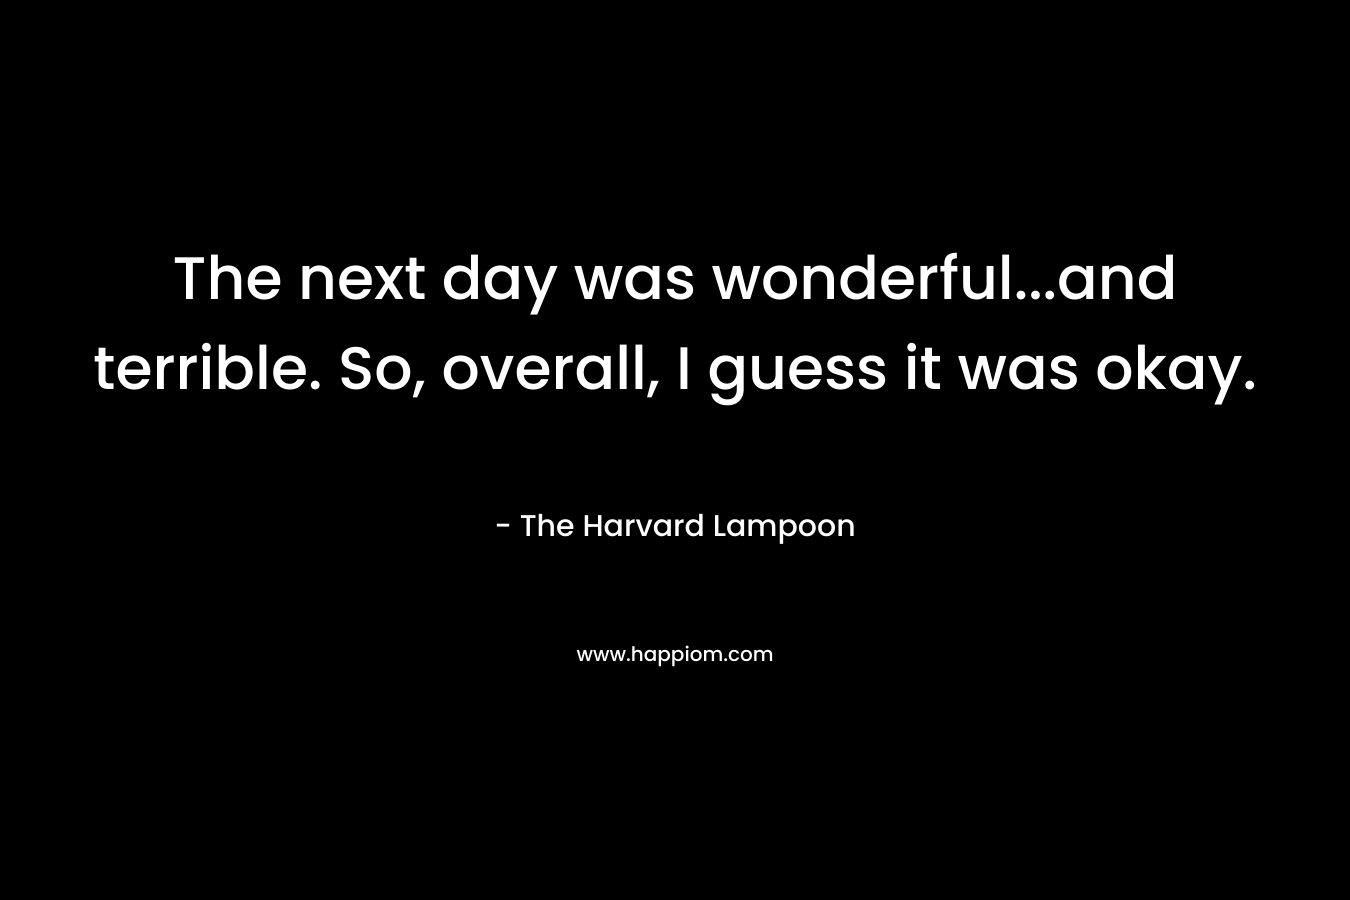 The next day was wonderful…and terrible. So, overall, I guess it was okay. – The Harvard Lampoon